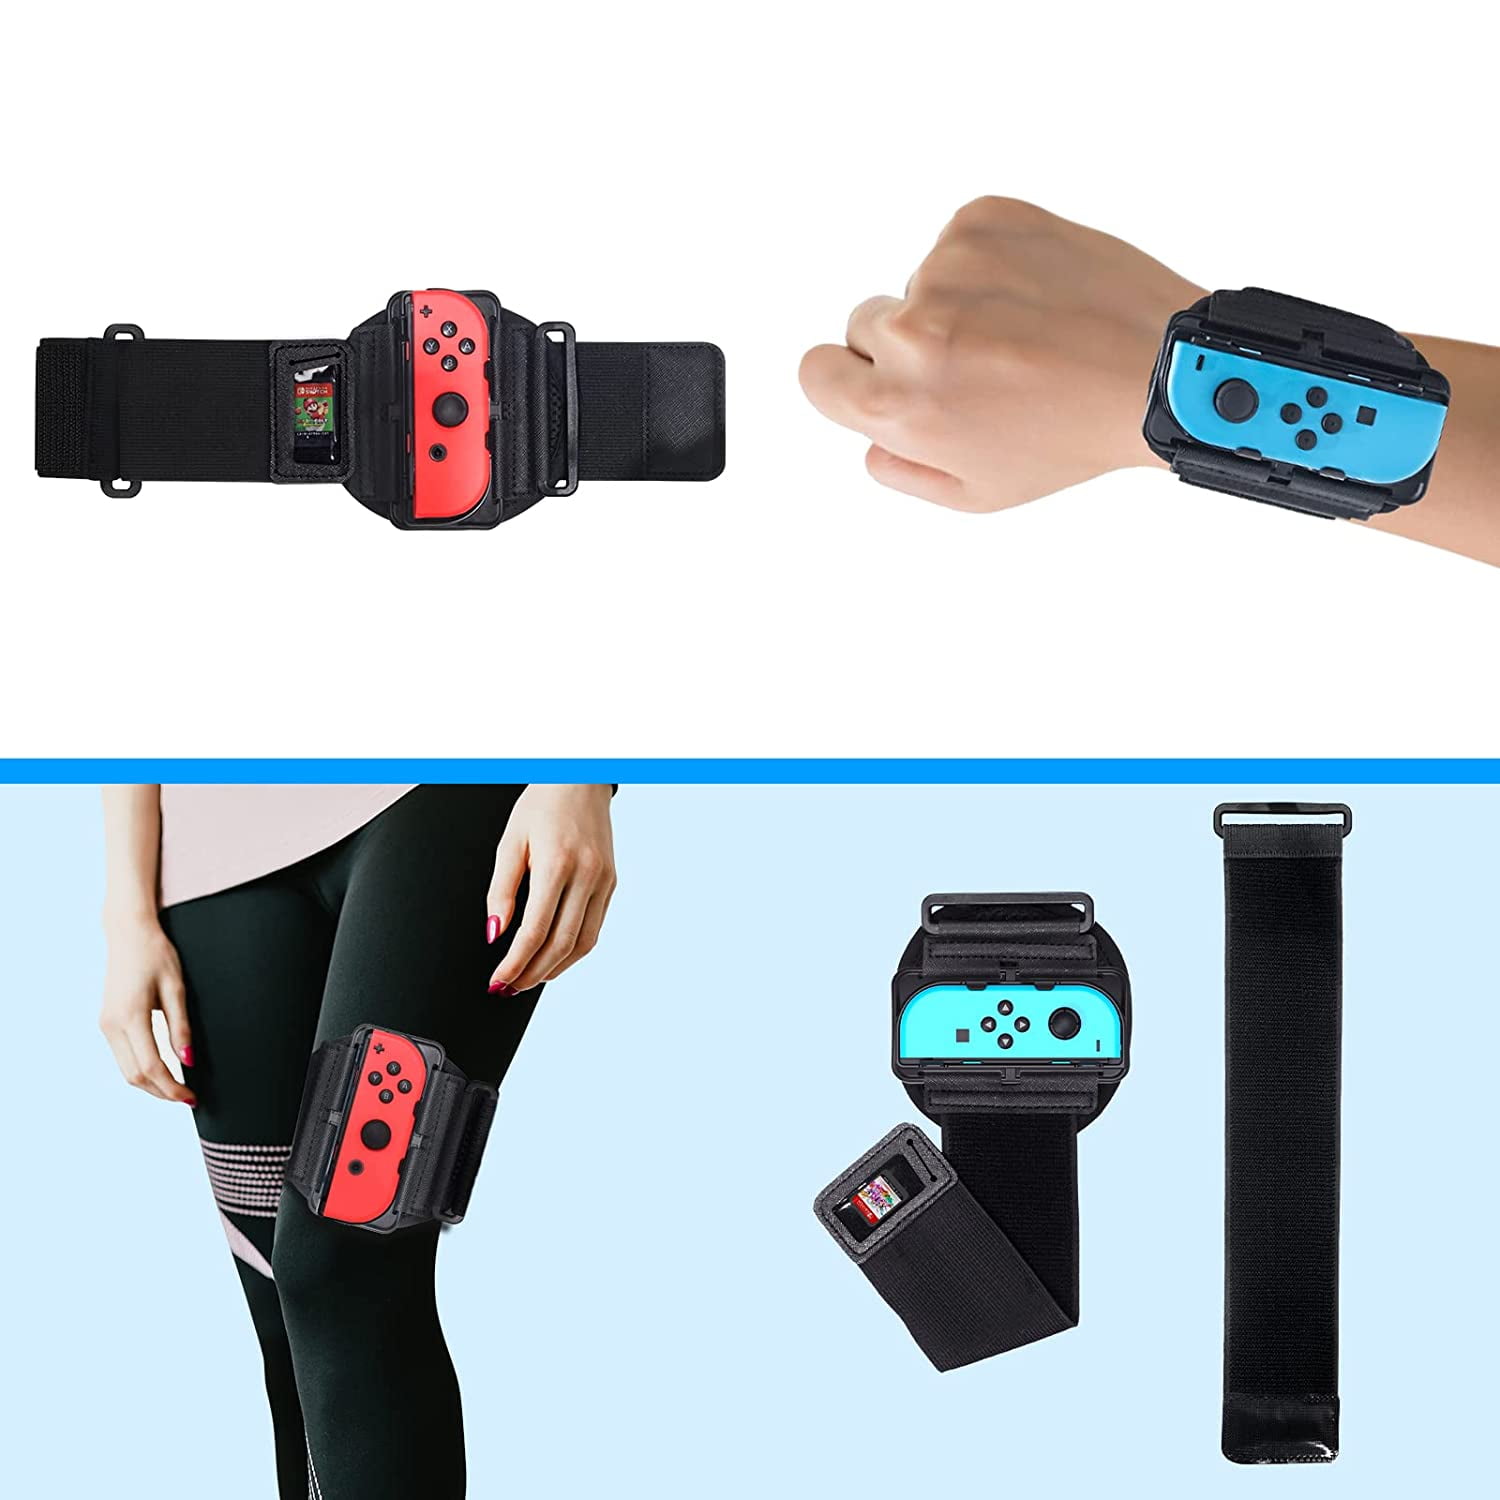 New Upgrade 2-in-1 Arm and Leg strap Compatible with Nintendo